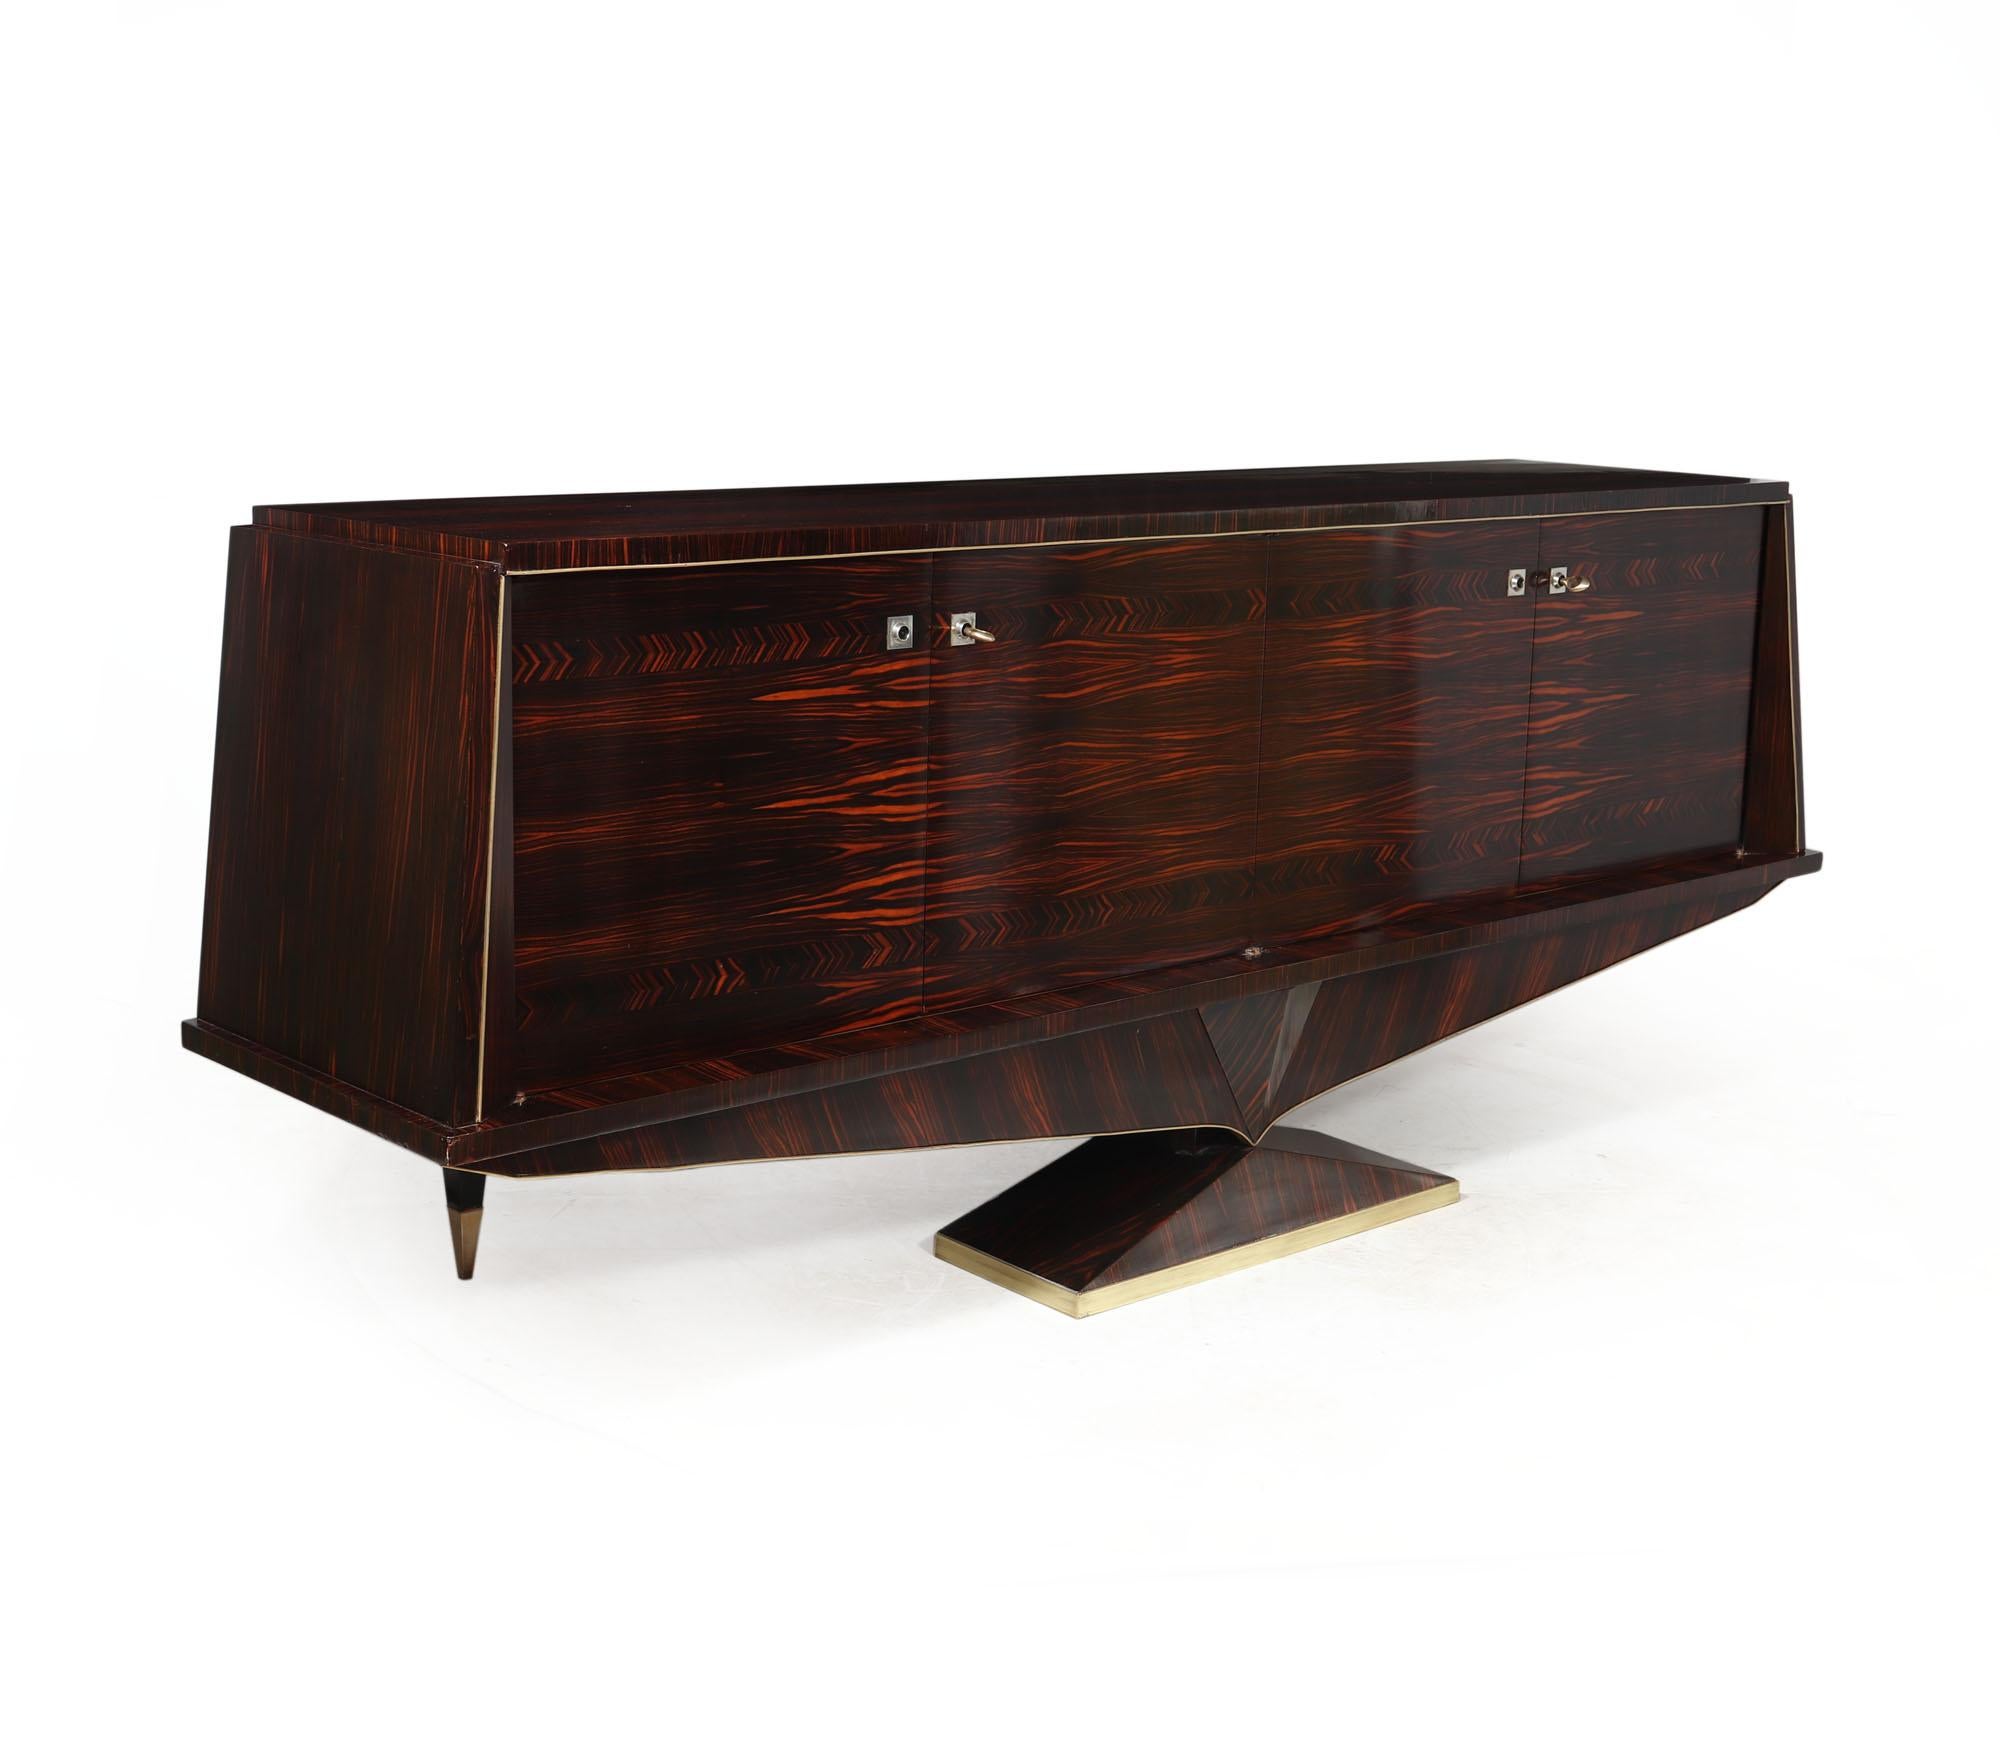 MID CENTURY SIDEBOARD IN MACASSAR 
Introducing a stunning 1960s Macassar sideboard, straight from France. The exquisite design showcases the rich and striking grain of Macassar wood, creating a captivating visual impact. Offering both form and